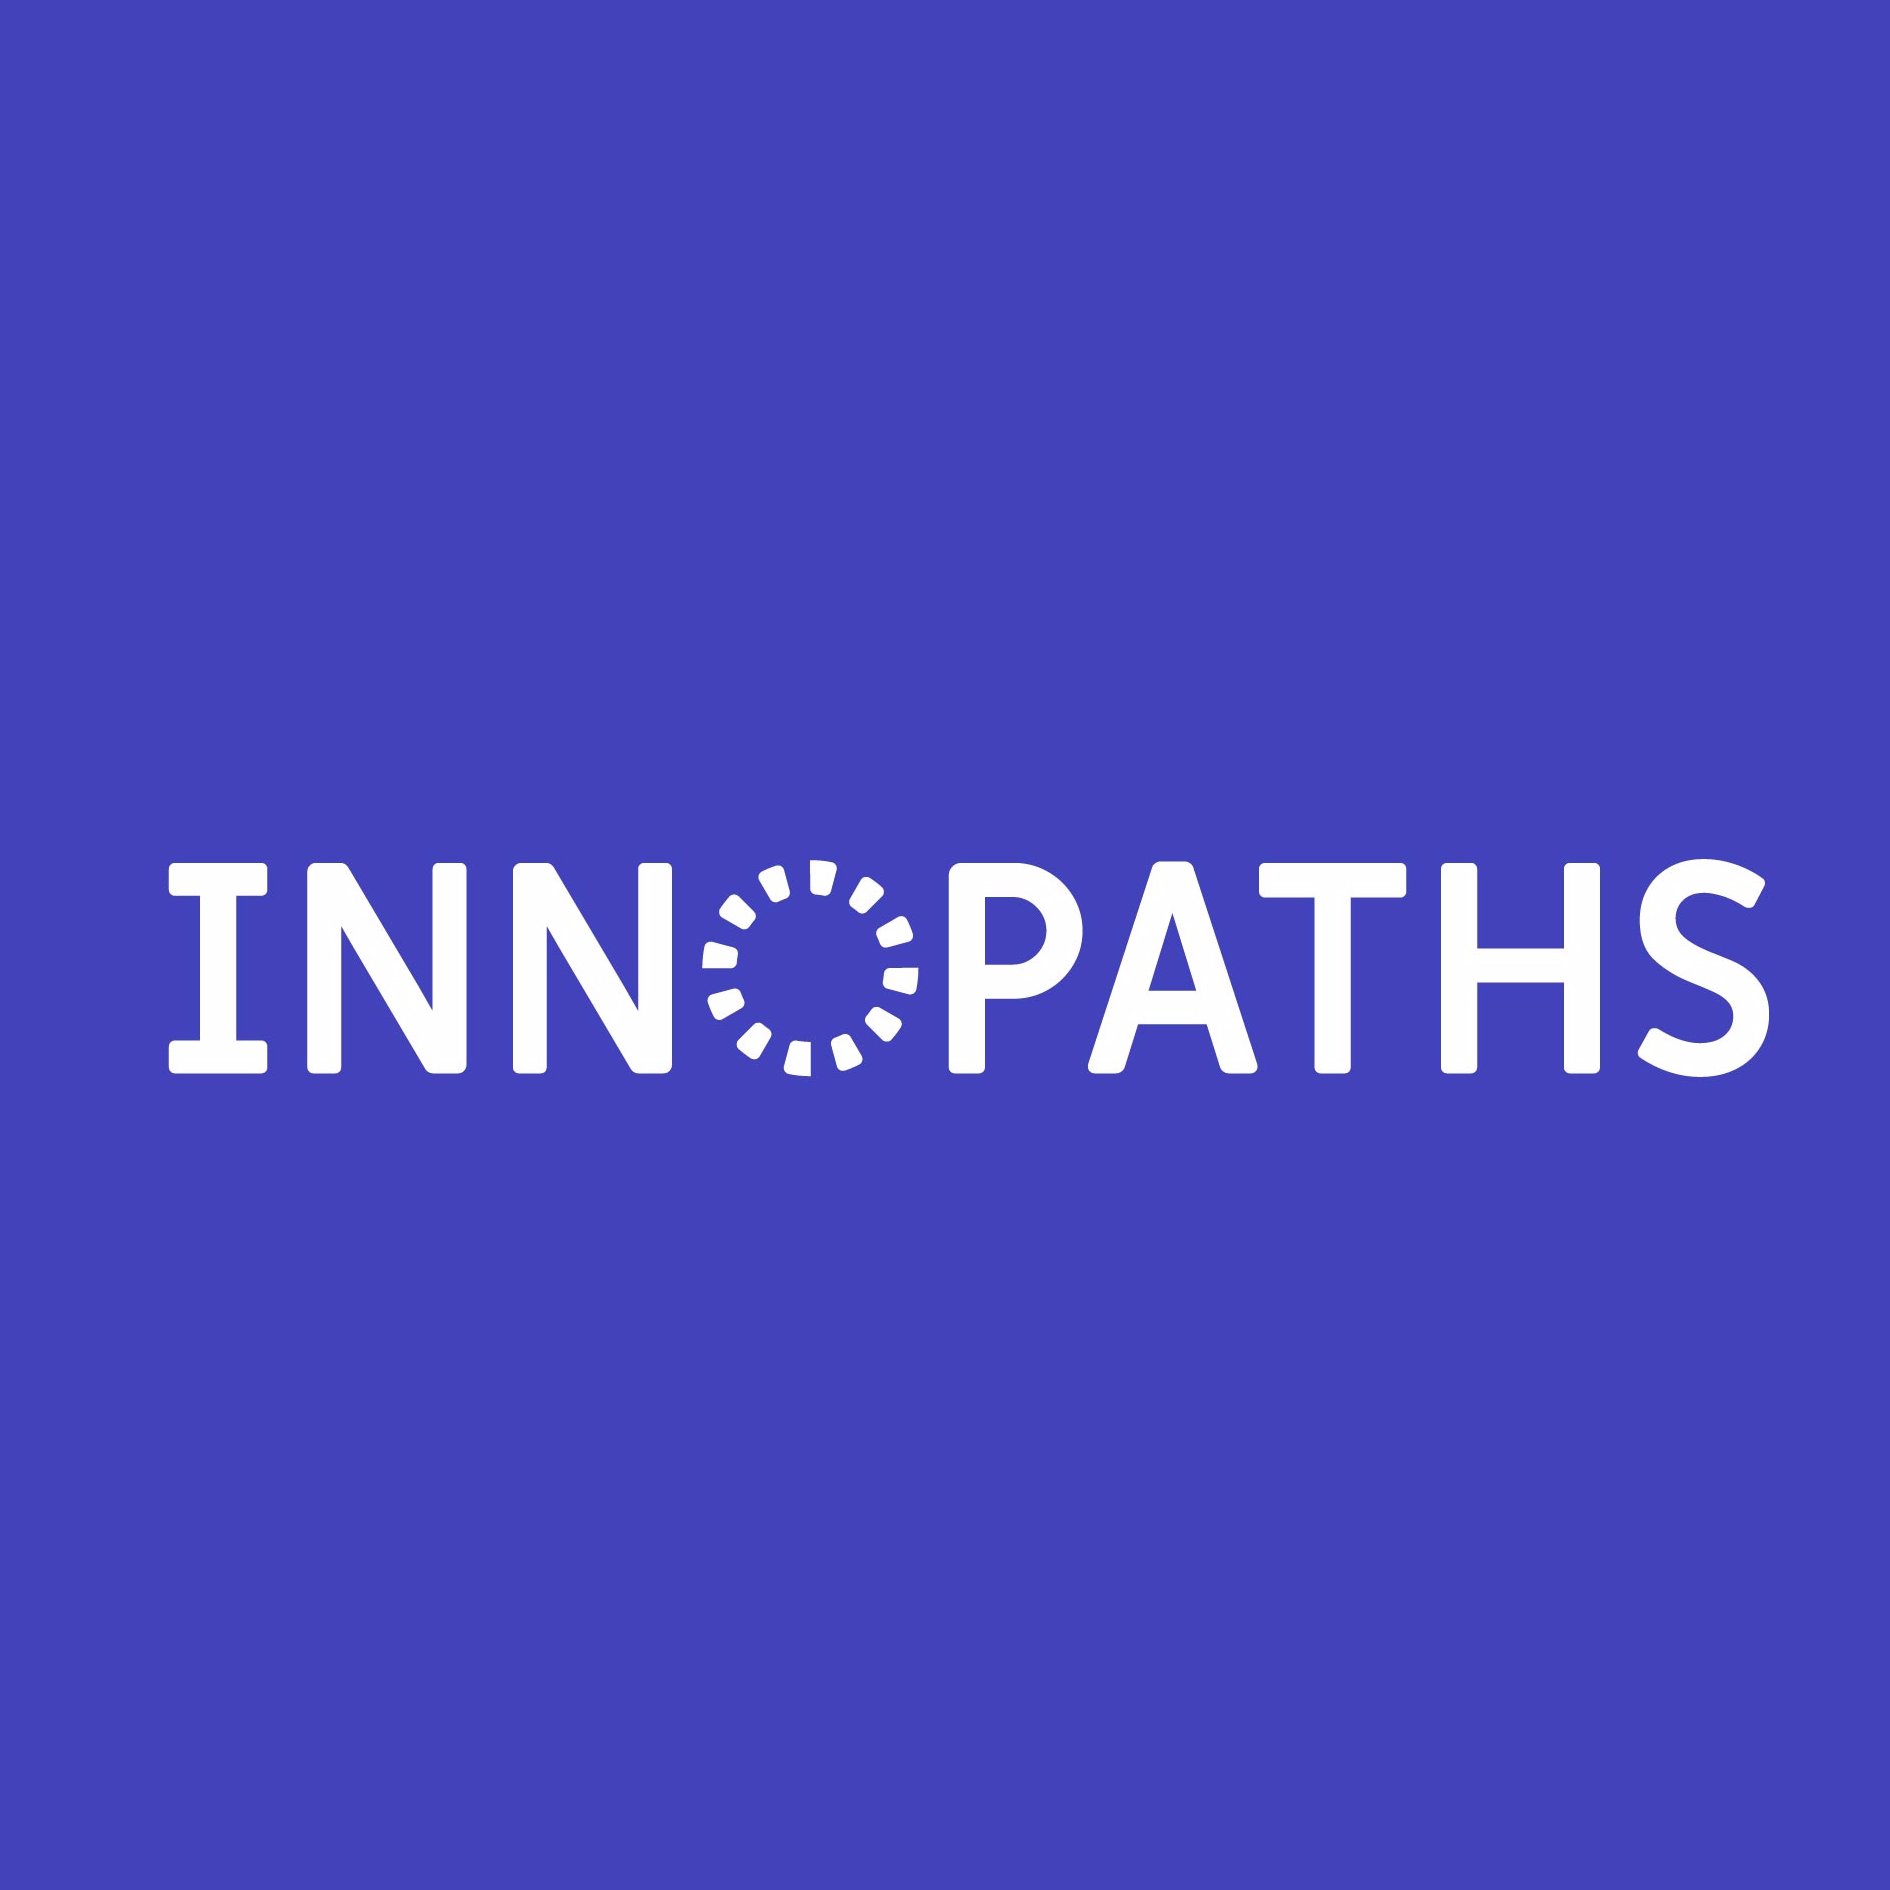 Innovation Pathways, Strategies and Policies for the Low-Carbon Transition in Europe (INNOPATHS) @EU_H2020 funded. Tweets reflect views of the project owner.